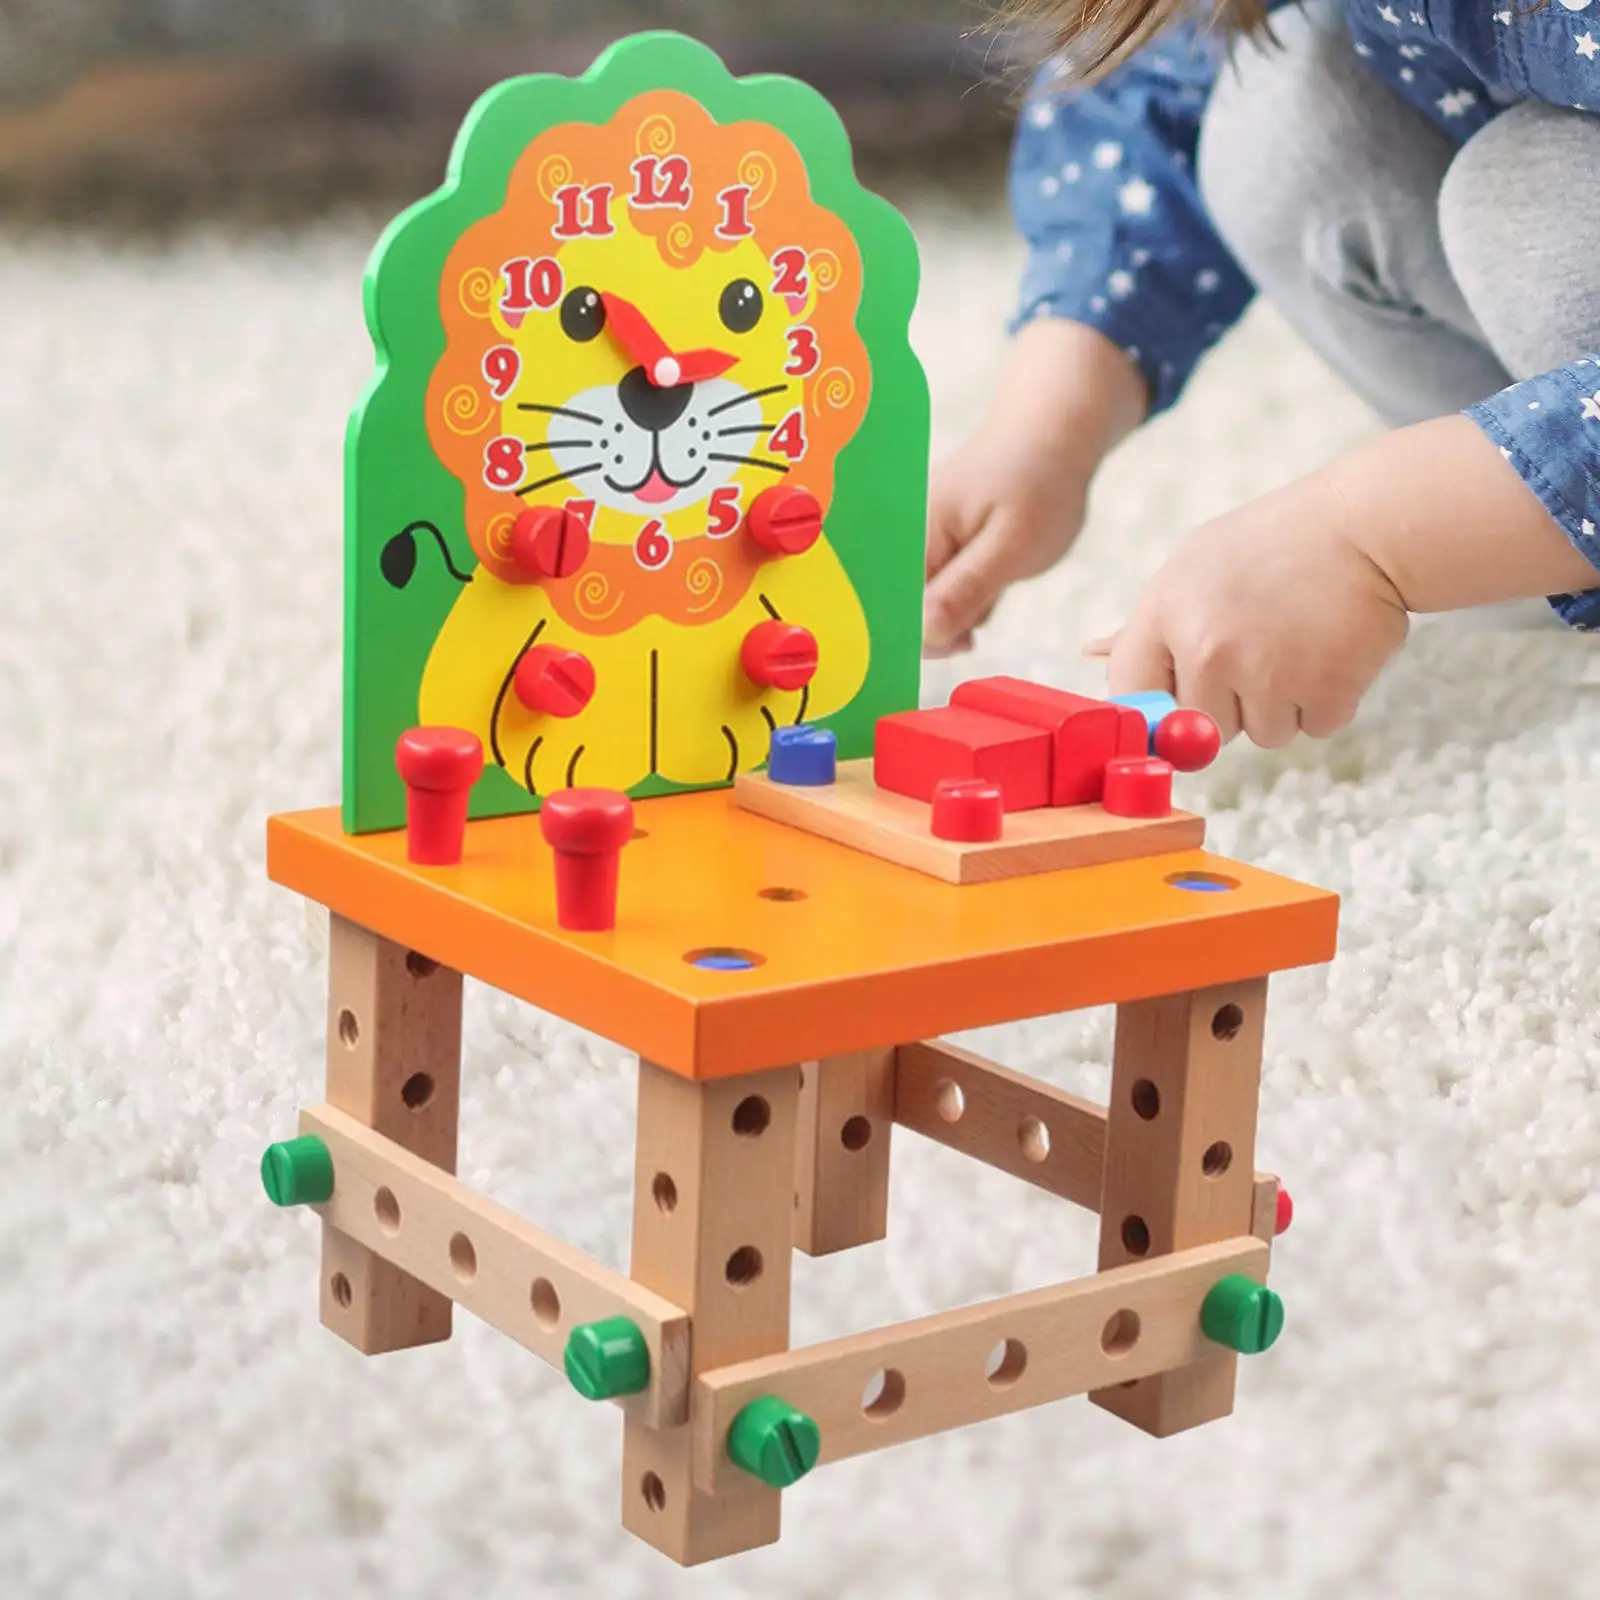 Wooden Chair Models Construction Play Set Kids Wooden Project Woodworking Kit for Children